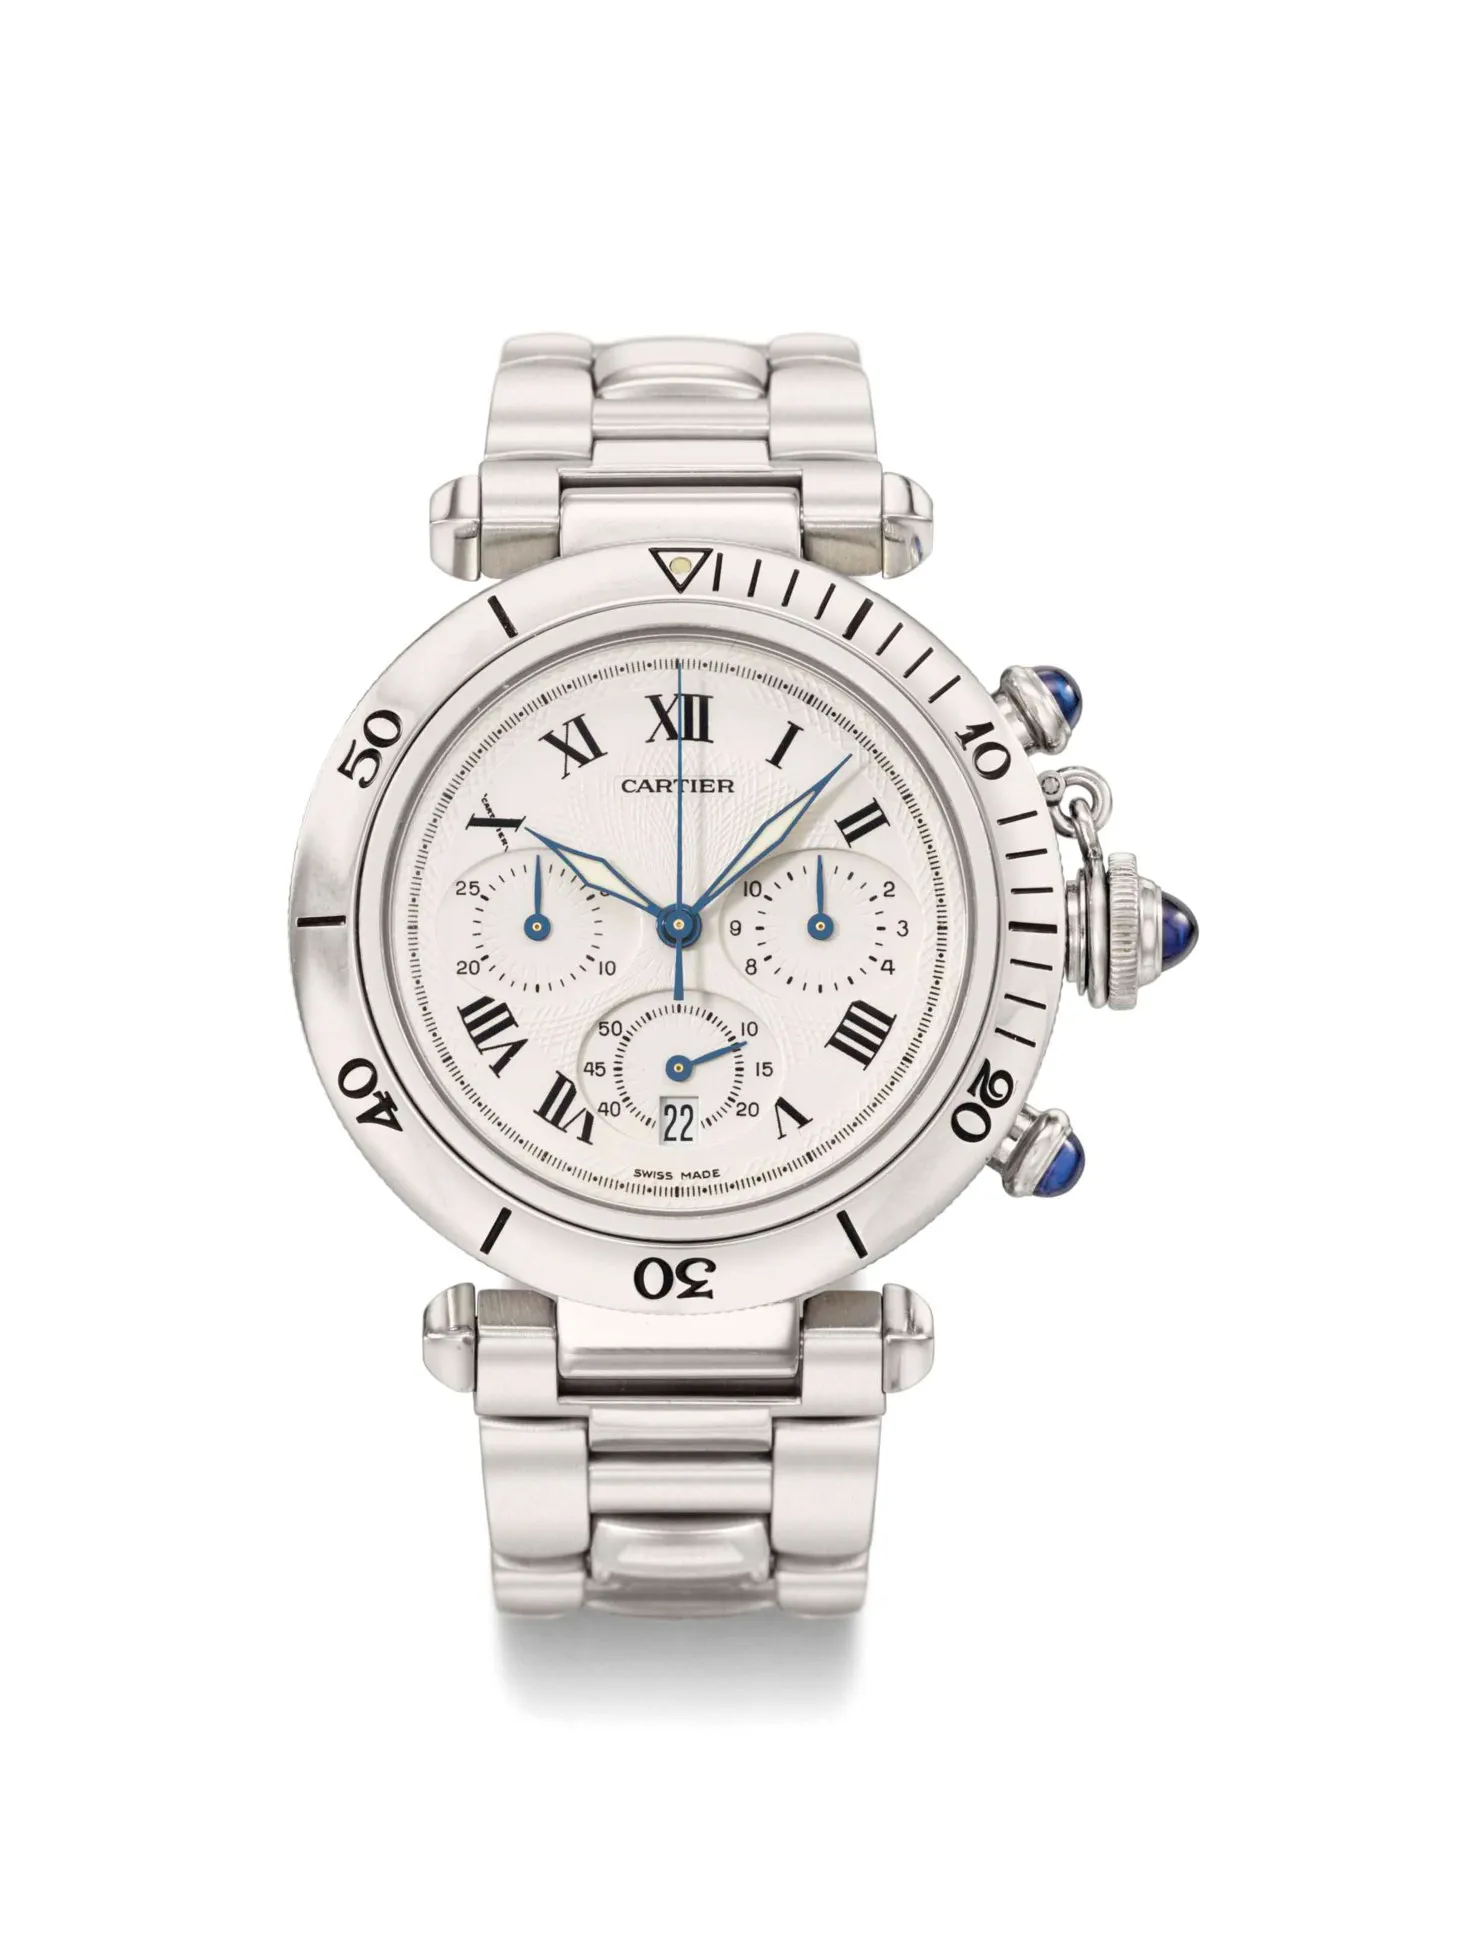 Cartier Pasha 1050 38.5mm Stainless steel White